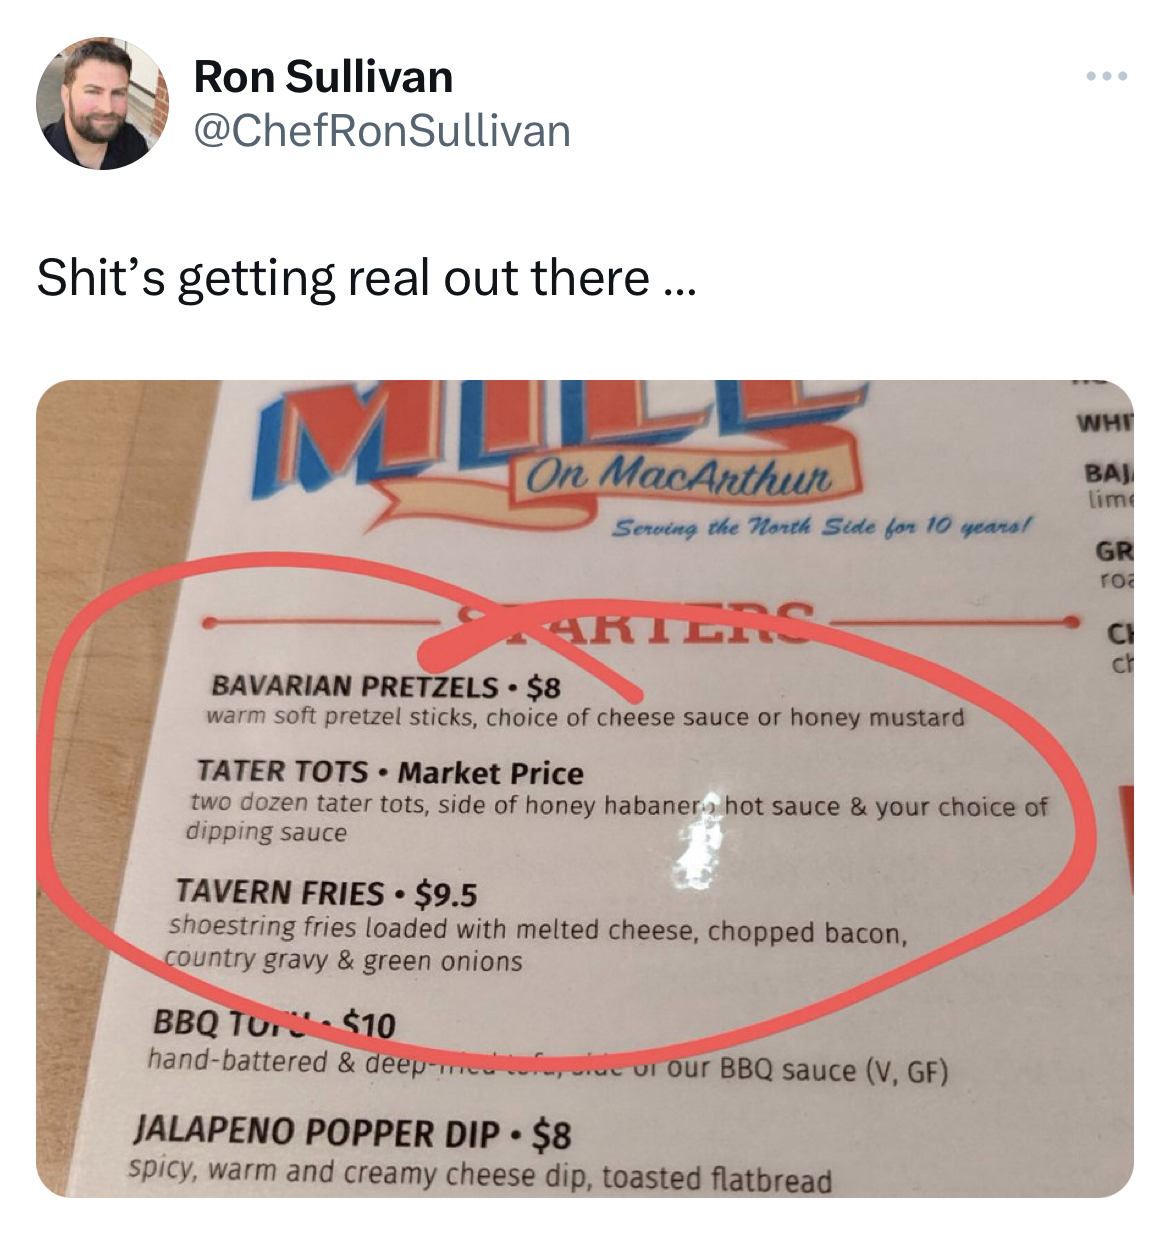 savage and absurd tweets - plaza charles miller - Ron Sullivan Shit's getting real out there... M On MacArthur Sewing the North Side for 10 ye Arters Bavarian Pretzels $8 warm soft pretzel sticks, choice of cheese sauce or honey mustard Tater Tots Market